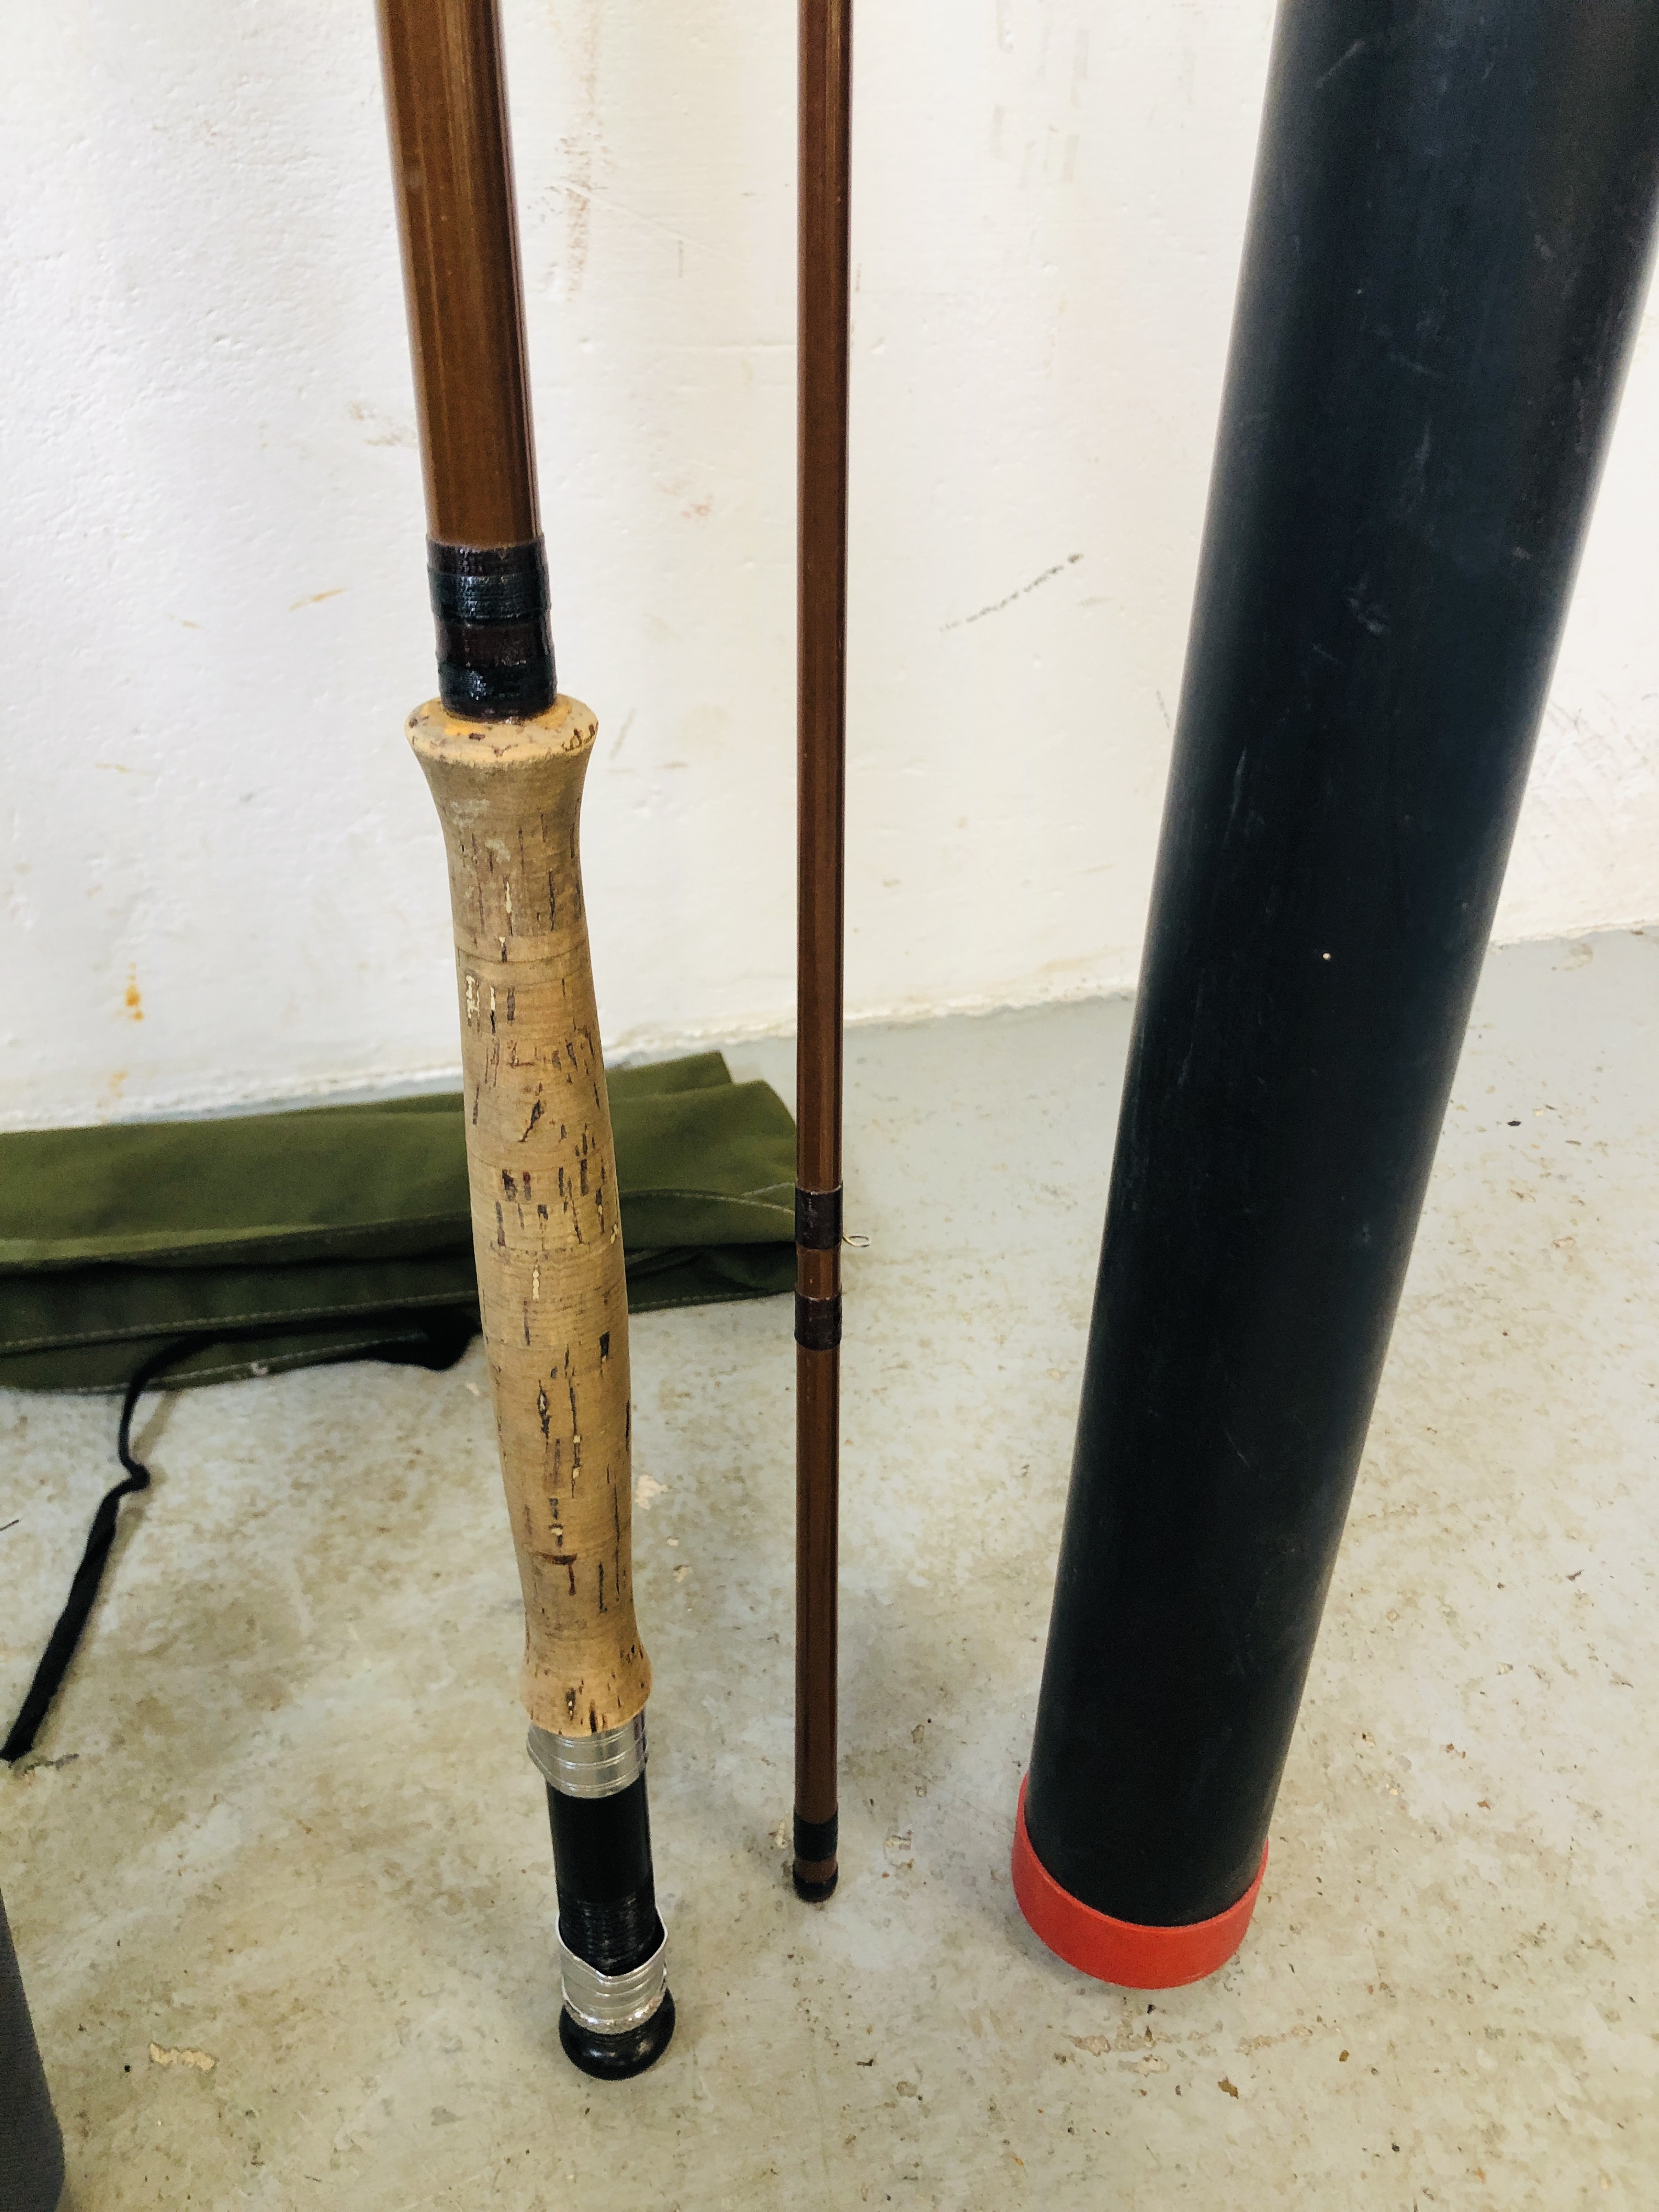 FOUR FLY FISHING RODS TO INCLUDE NORMARK THREE PIECE AND ONE OTHER TWO PIECE ROD AND THREE PIECE - Image 7 of 8